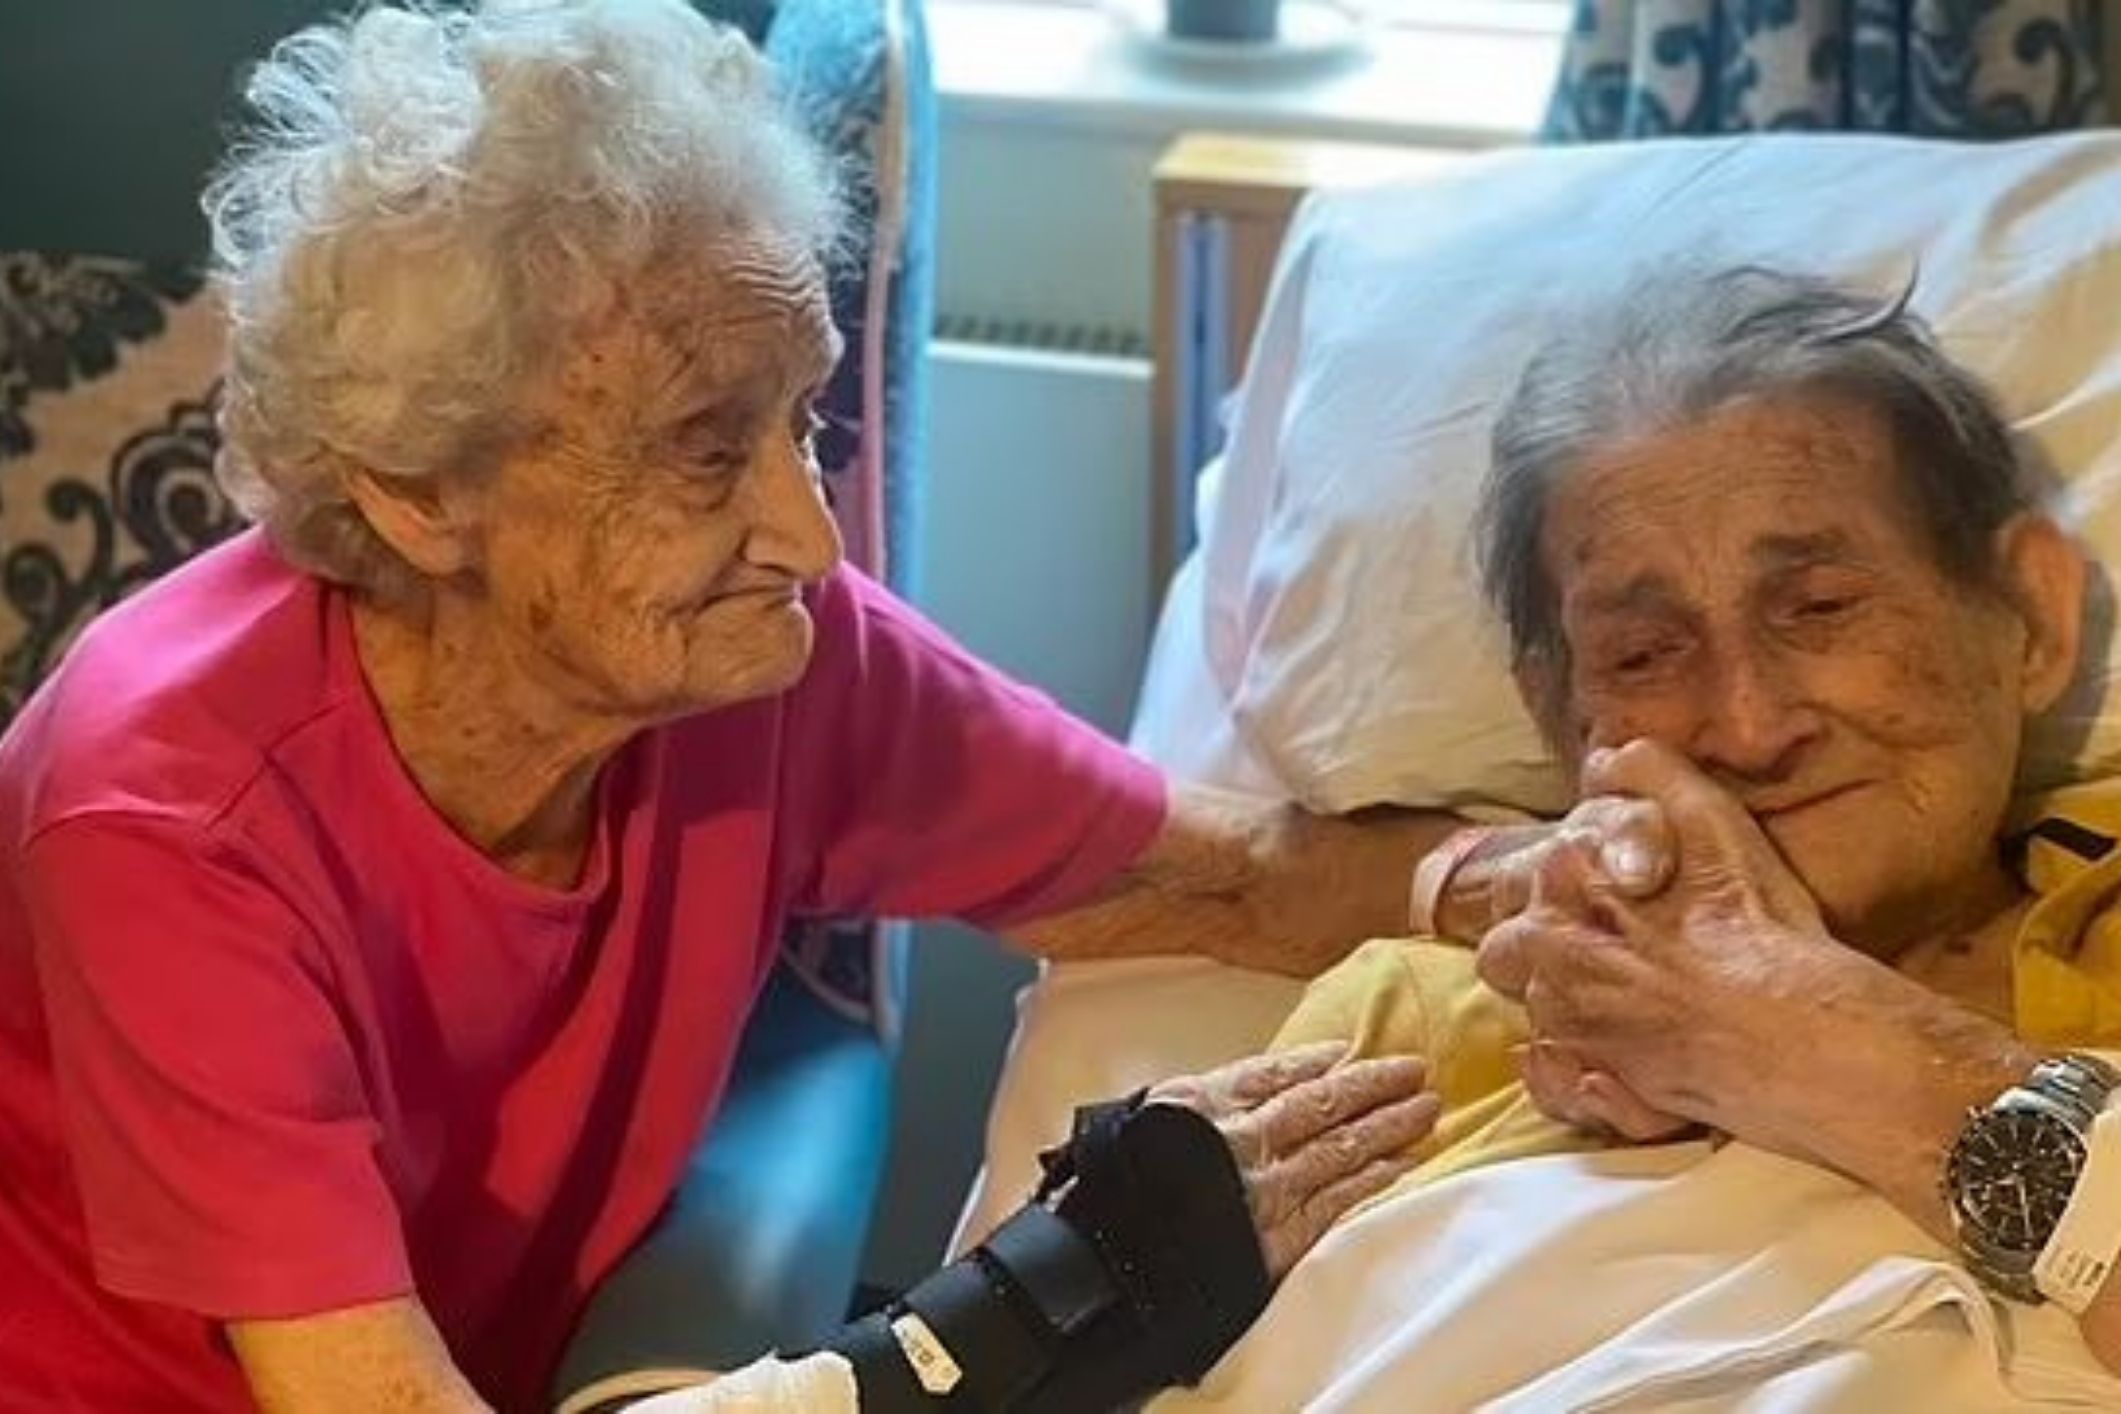 Elderly couple reunited after 100 days apart due to Covid protocols